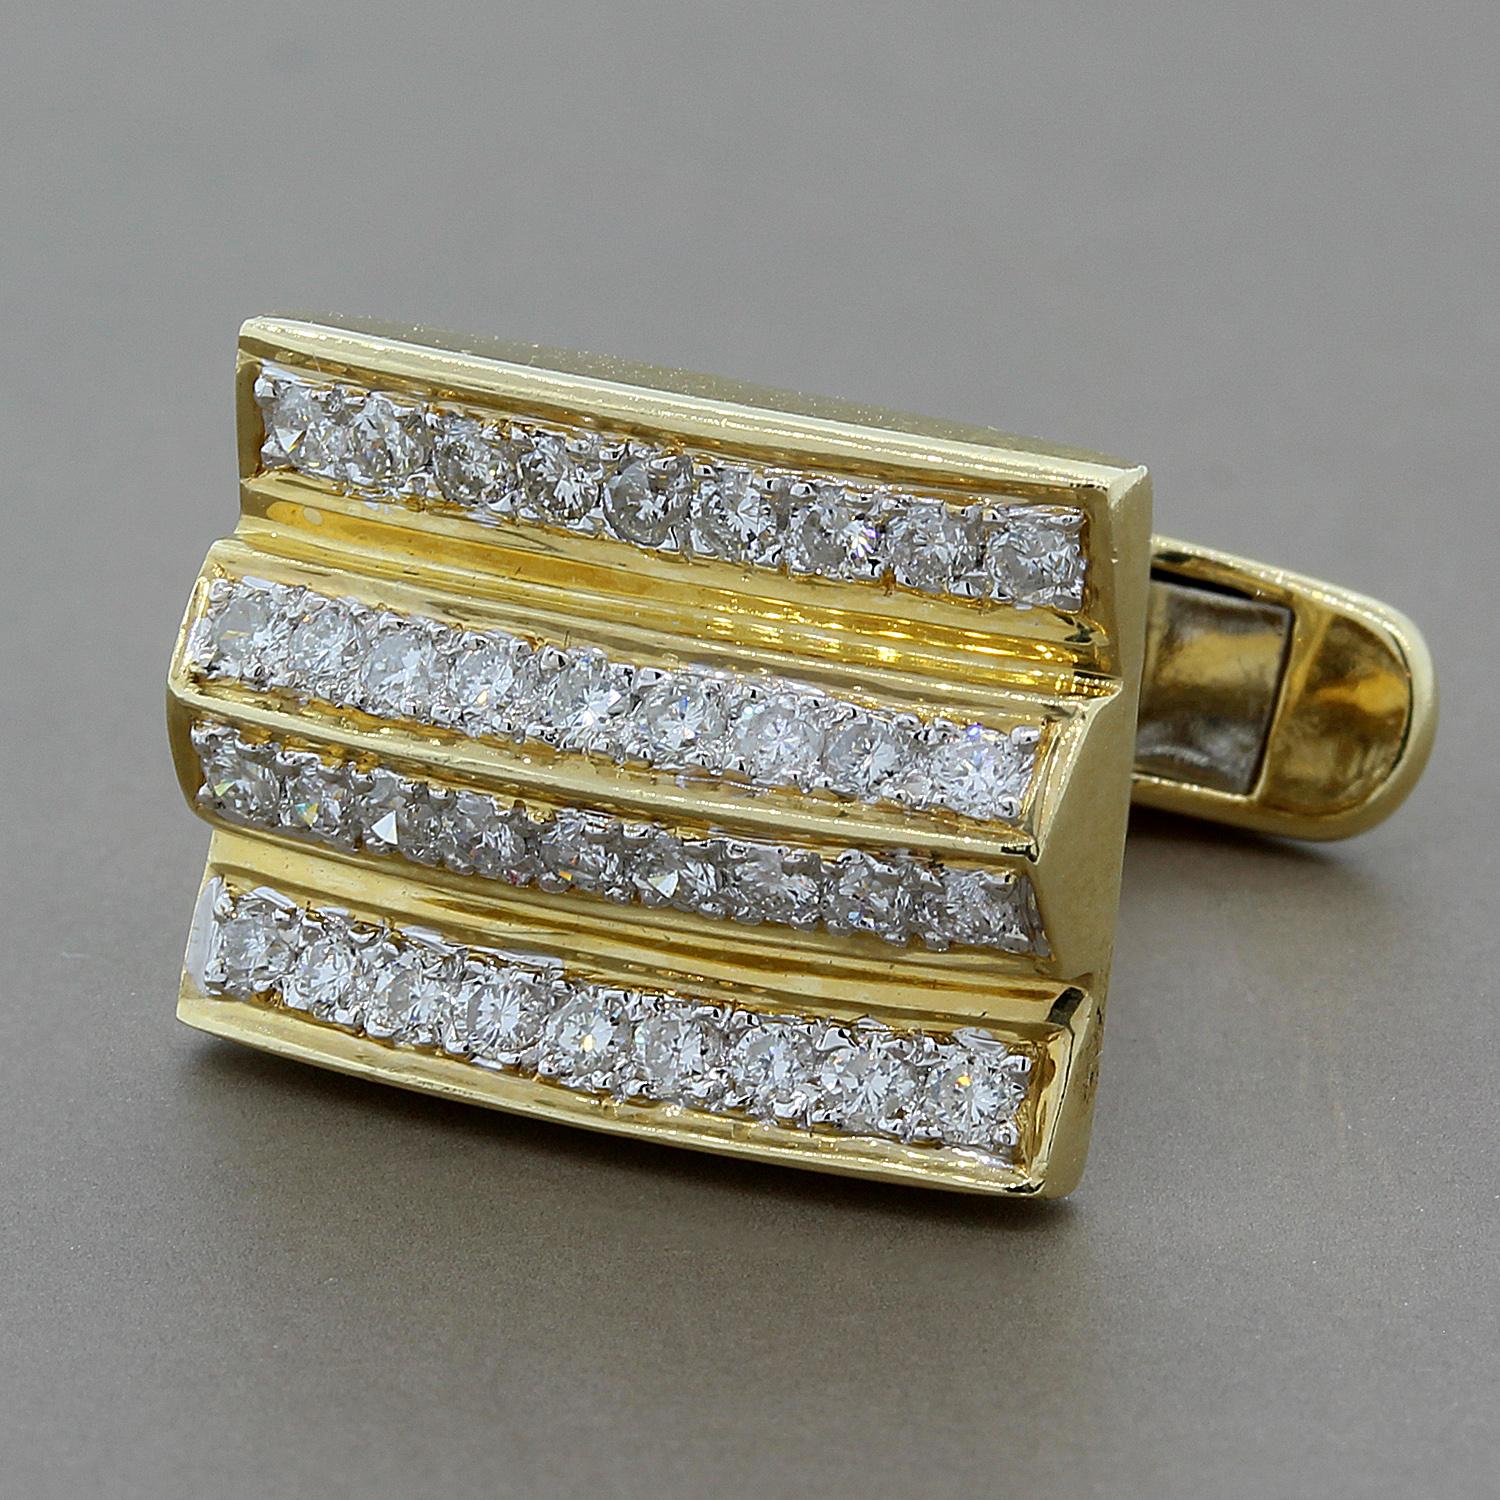 A pair of cufflinks featuring 1.30 carats of round cut diamonds on a special design in 14K yellow gold.  These are sure to dress up any suit.